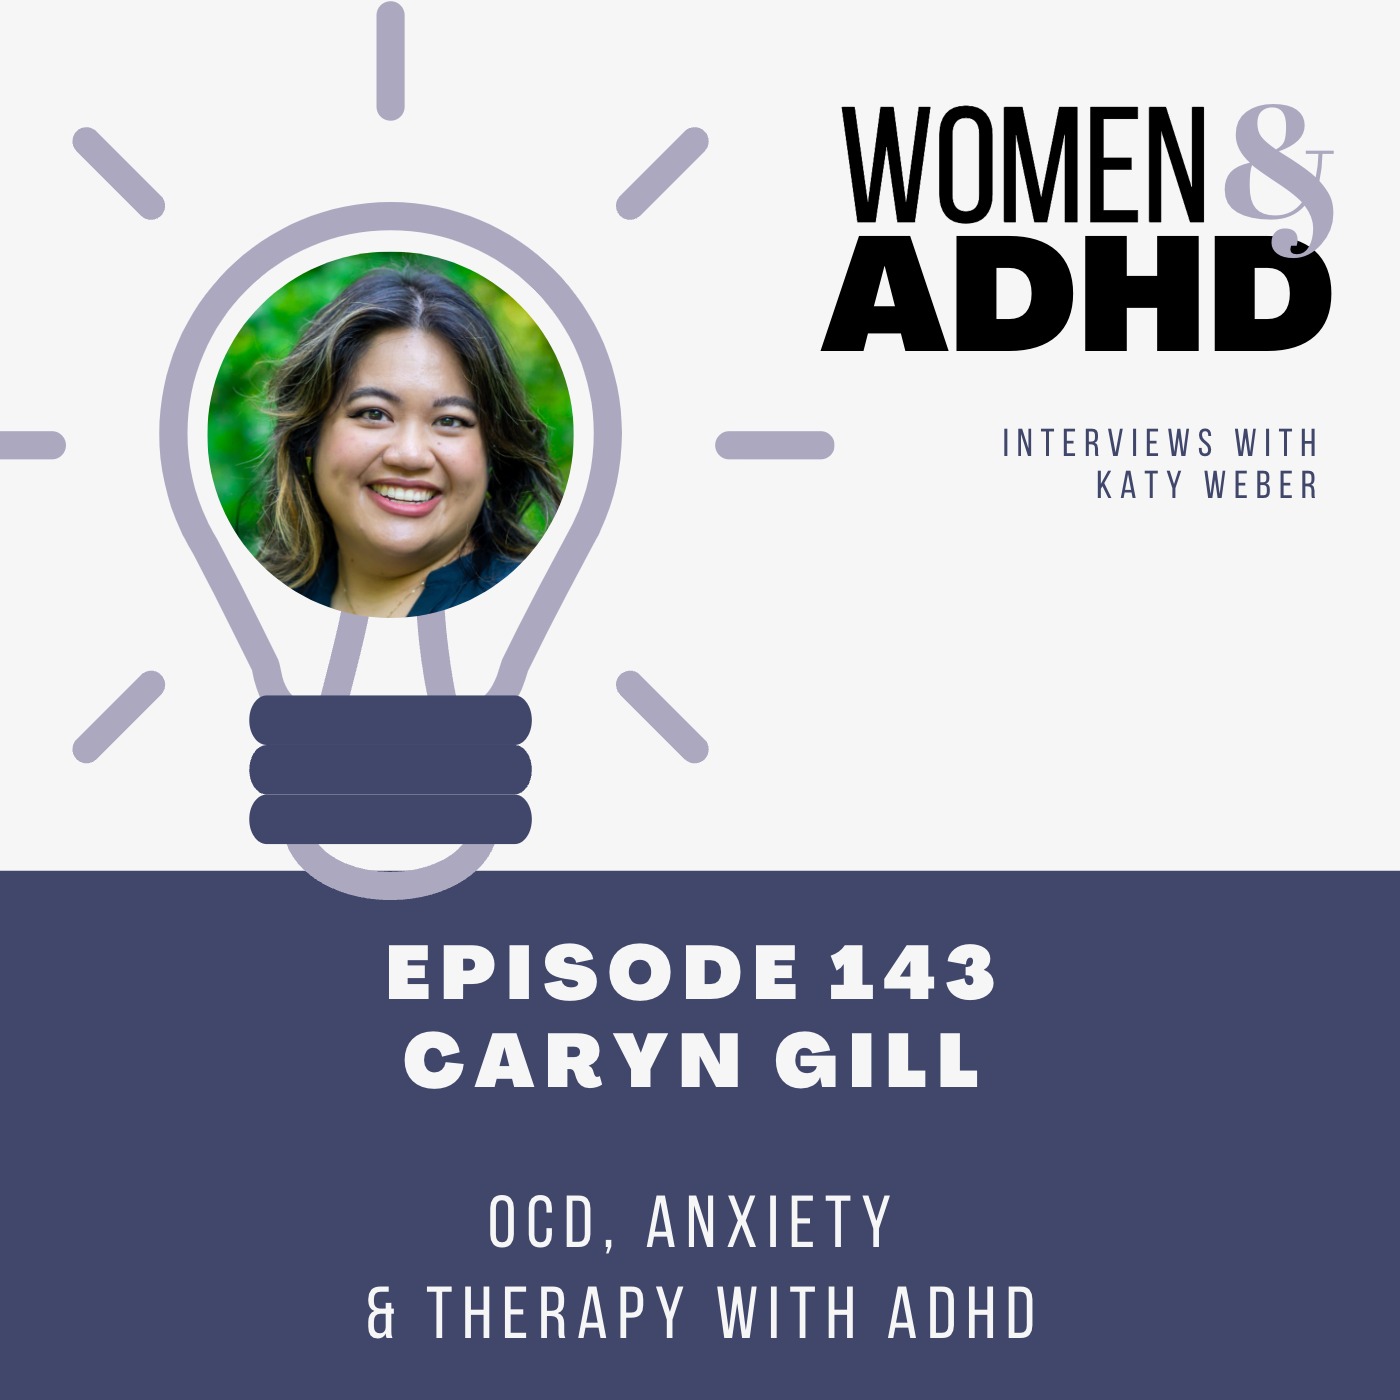 Caryn Gill: OCD, anxiety & therapy with ADHD